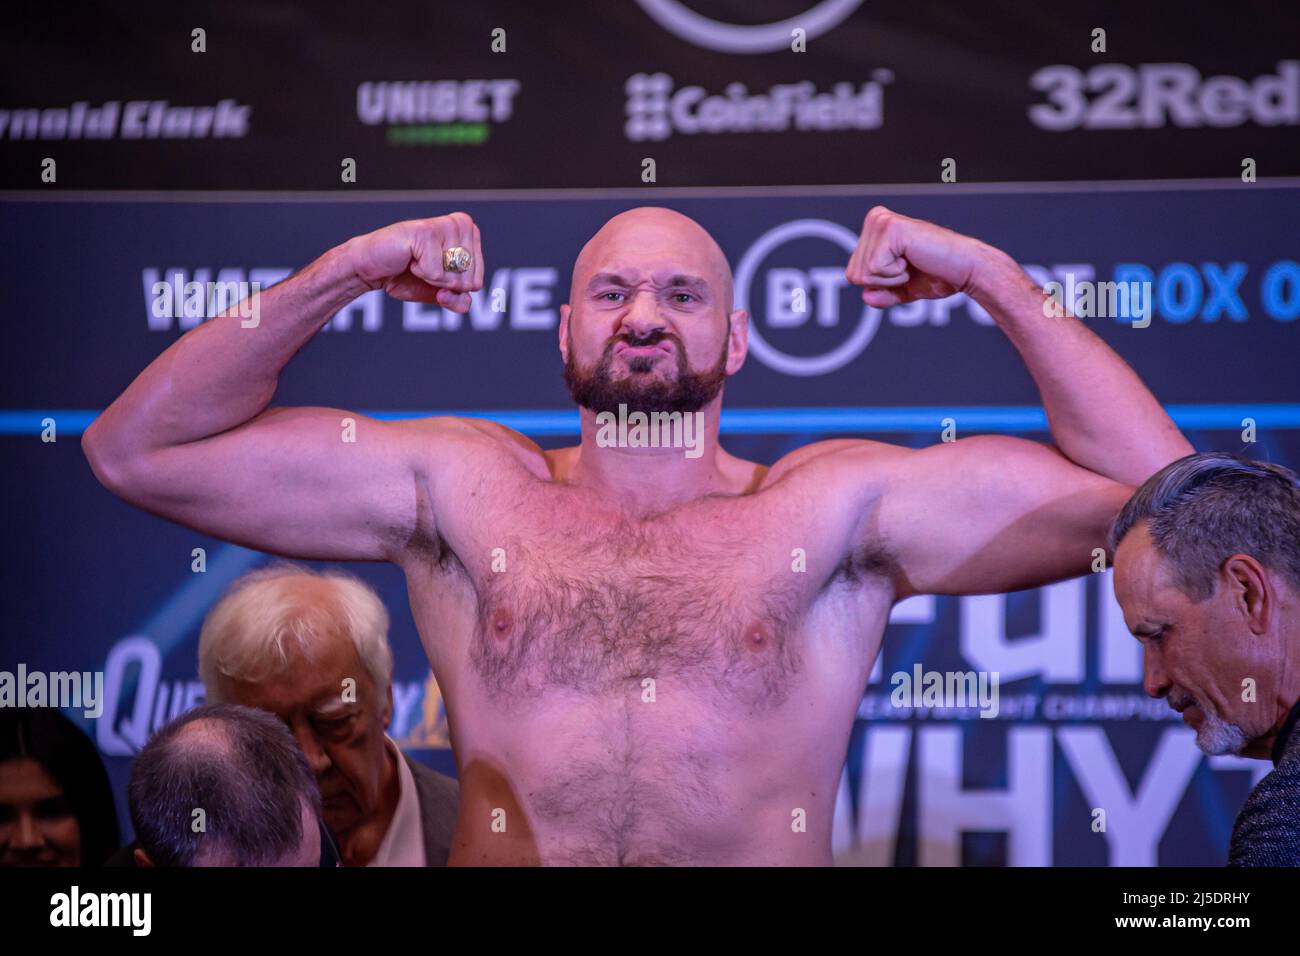 LONDON, ENGLAND - APRIL 22: Boxer Tyson Fury steps on the scale during the official weigh-in for his bout against Dillian Whyte at the Boxepark on April 22, 2022, in London, England, UK. (Photo by Matt Davies/PxImages) Credit: Px Images/Alamy Live News Stock Photo